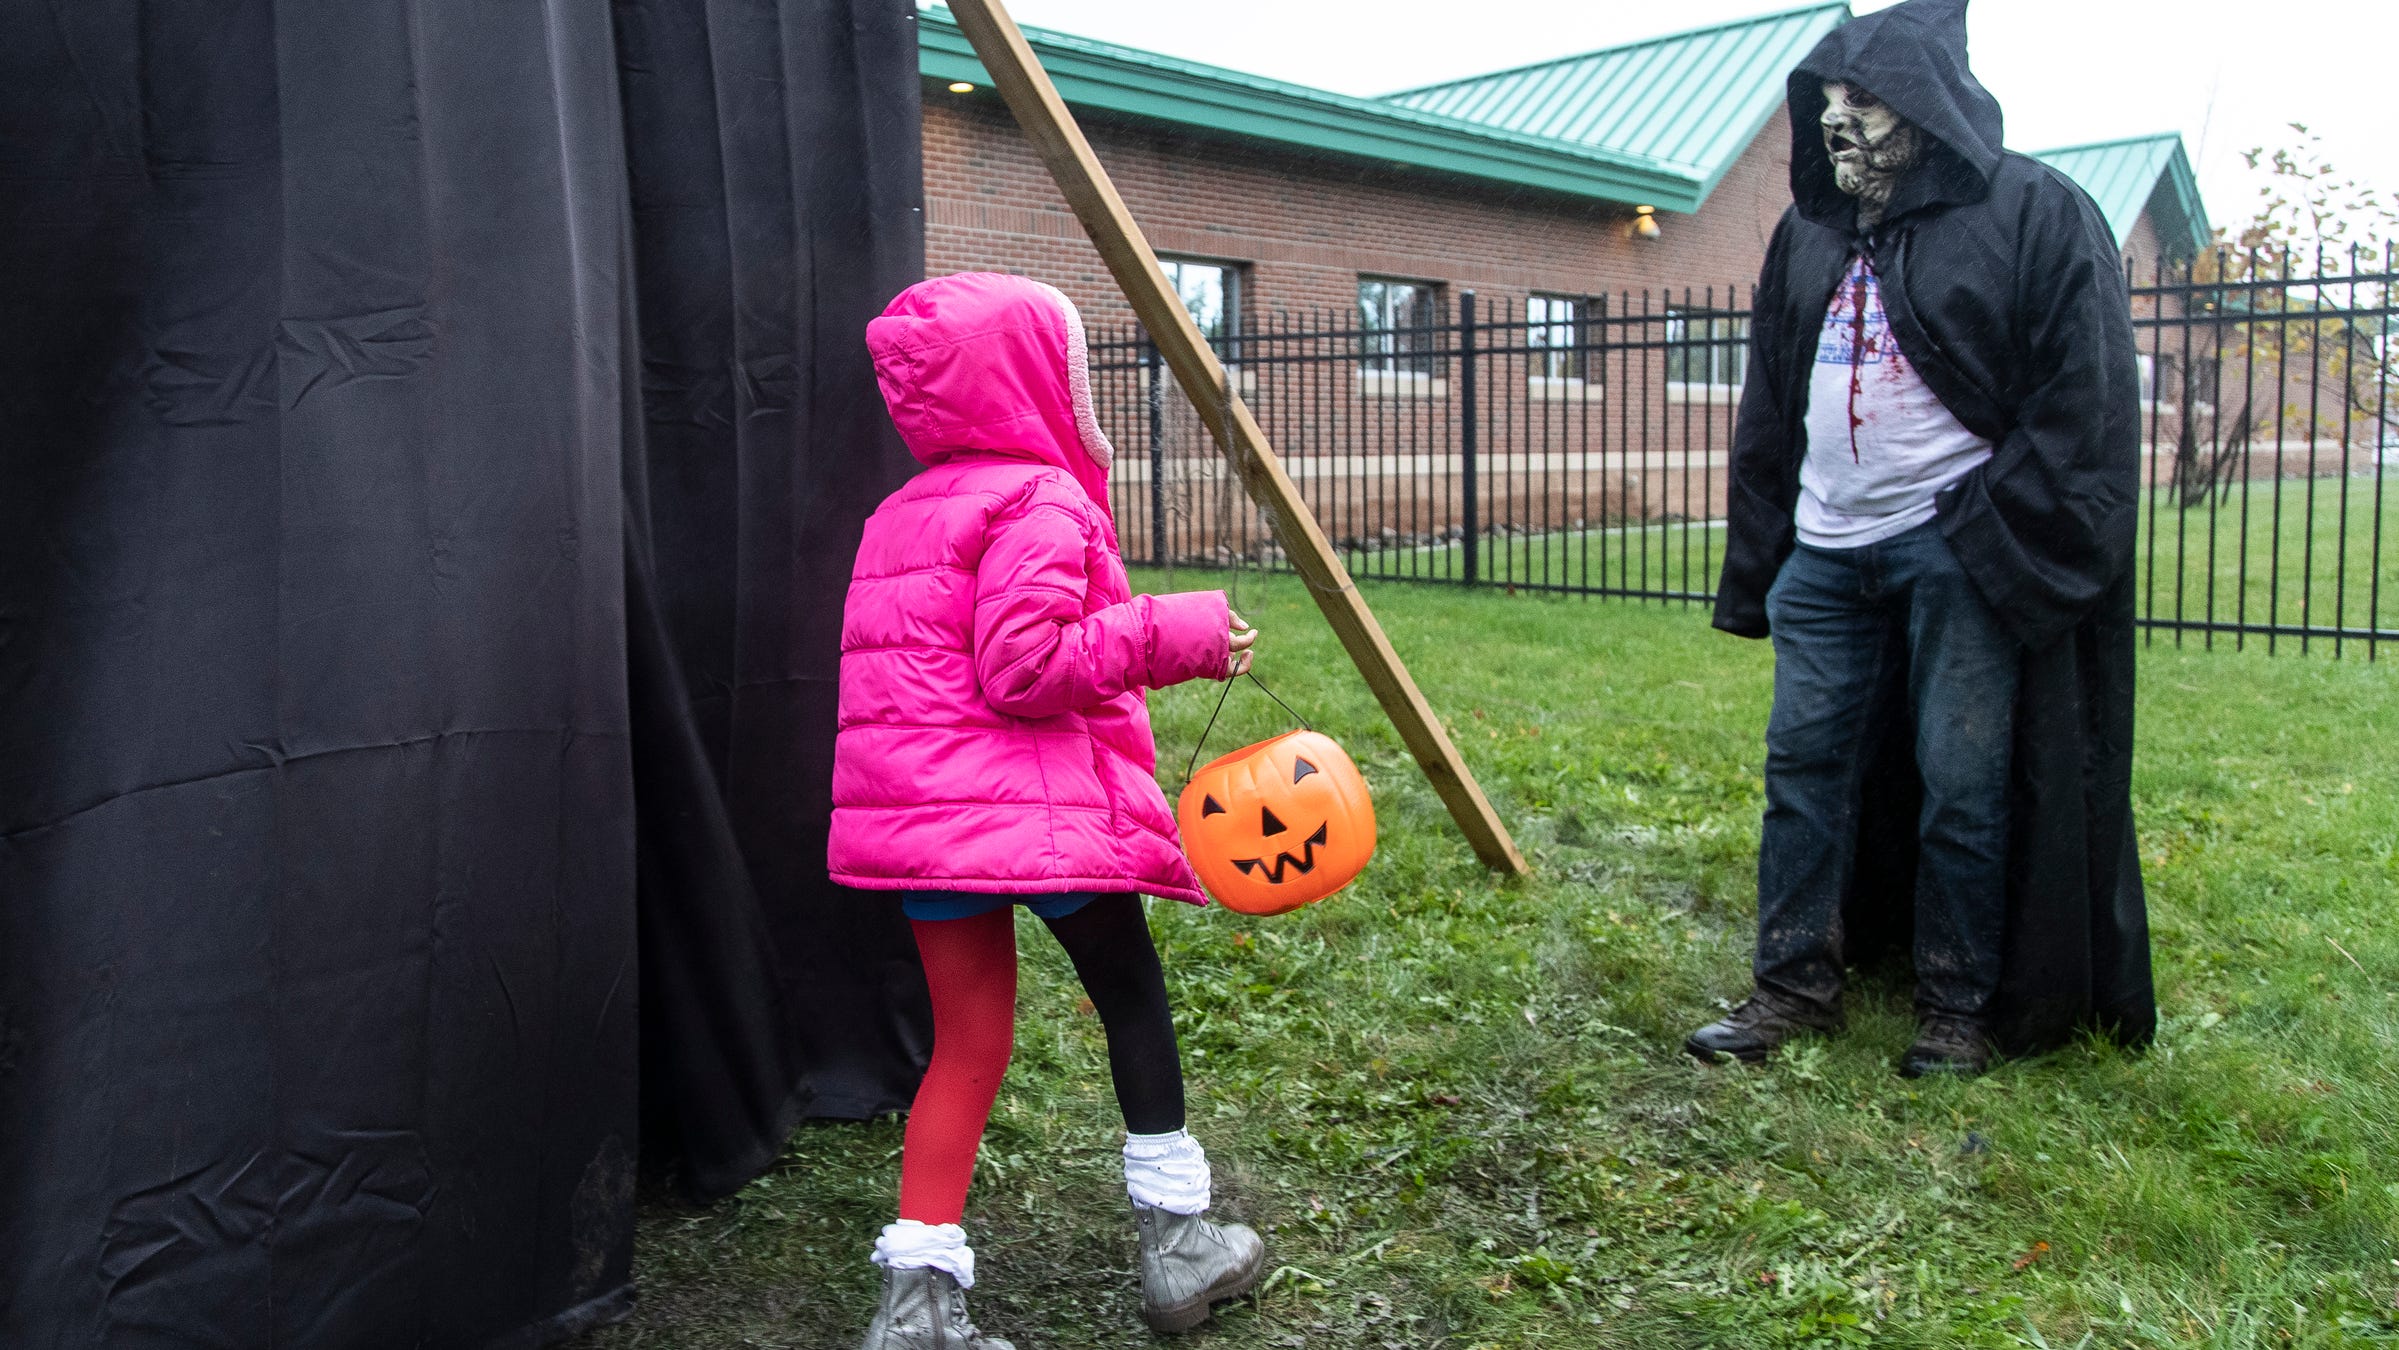 Halloween is on in southeast Michigan, with some precautions